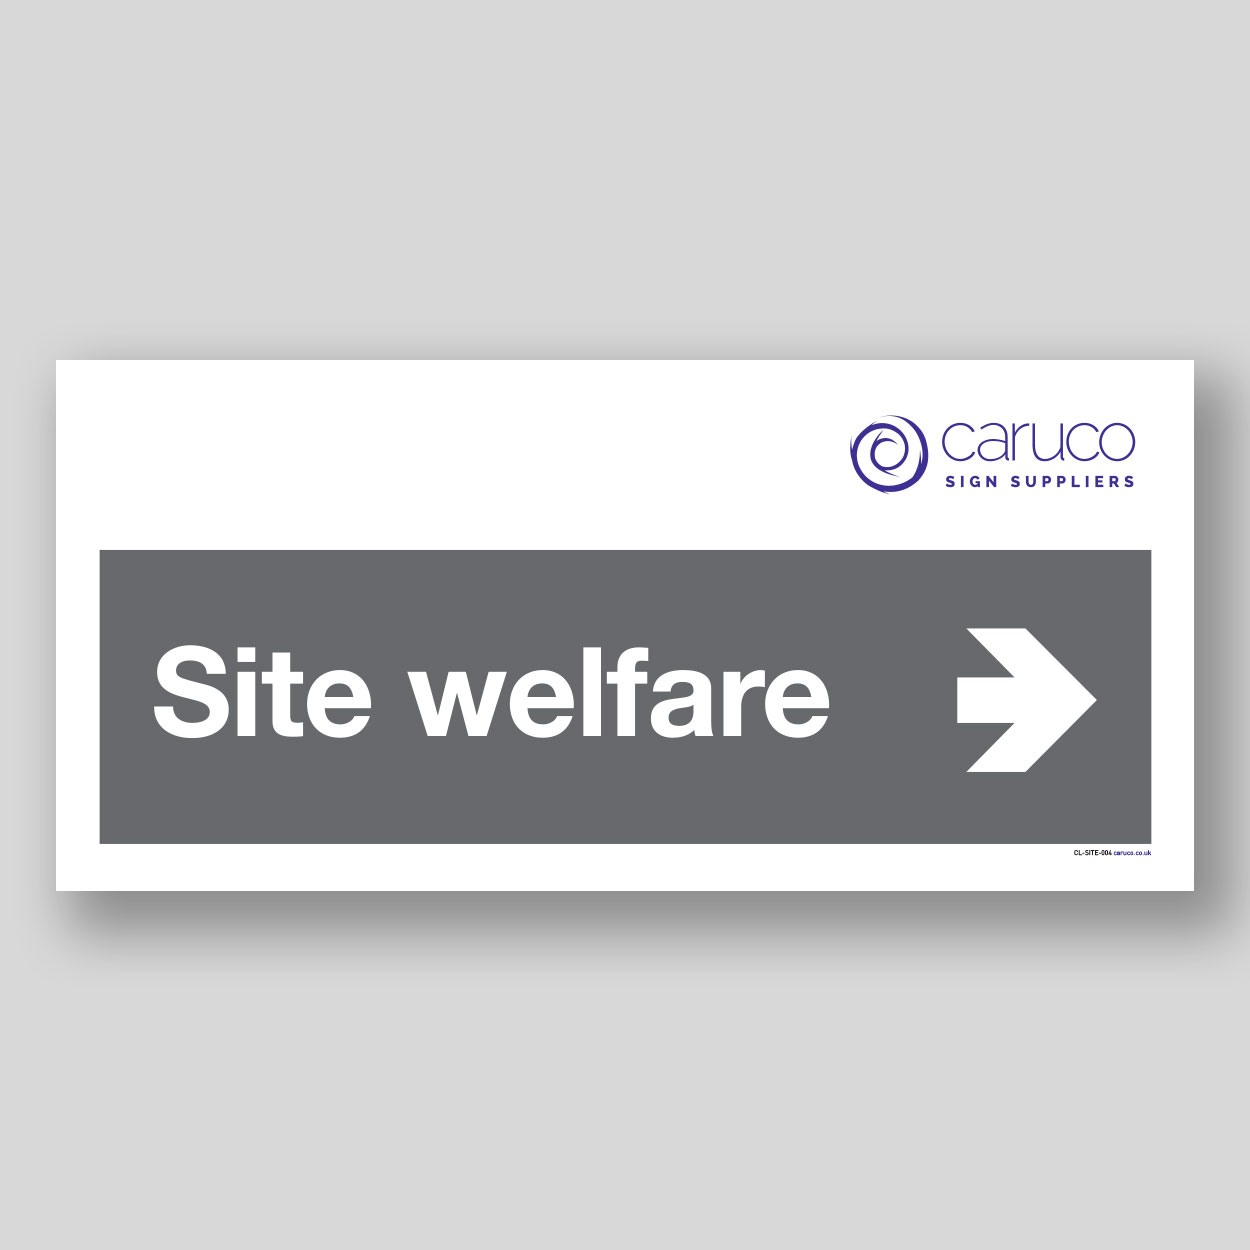 CL-SITE-004 Site welfare with right arrow